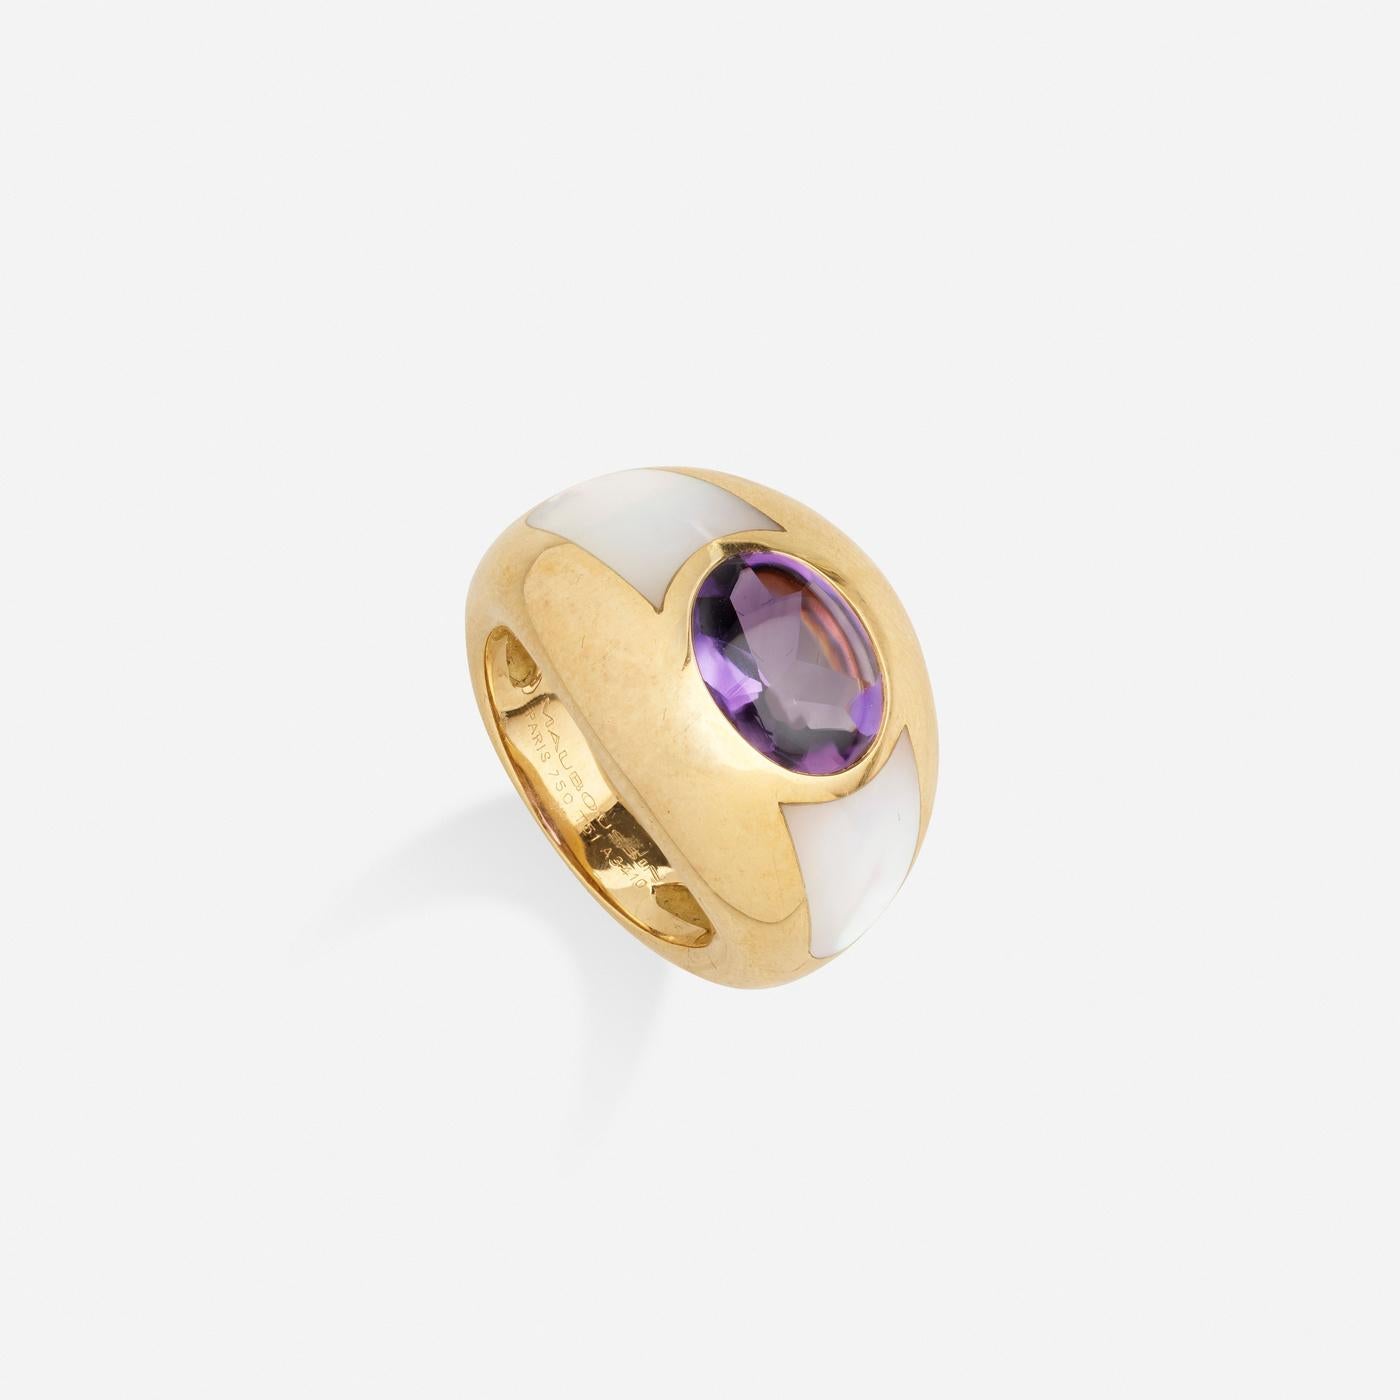 Stylish Mauboussin amethyst and Mother of Pearl  